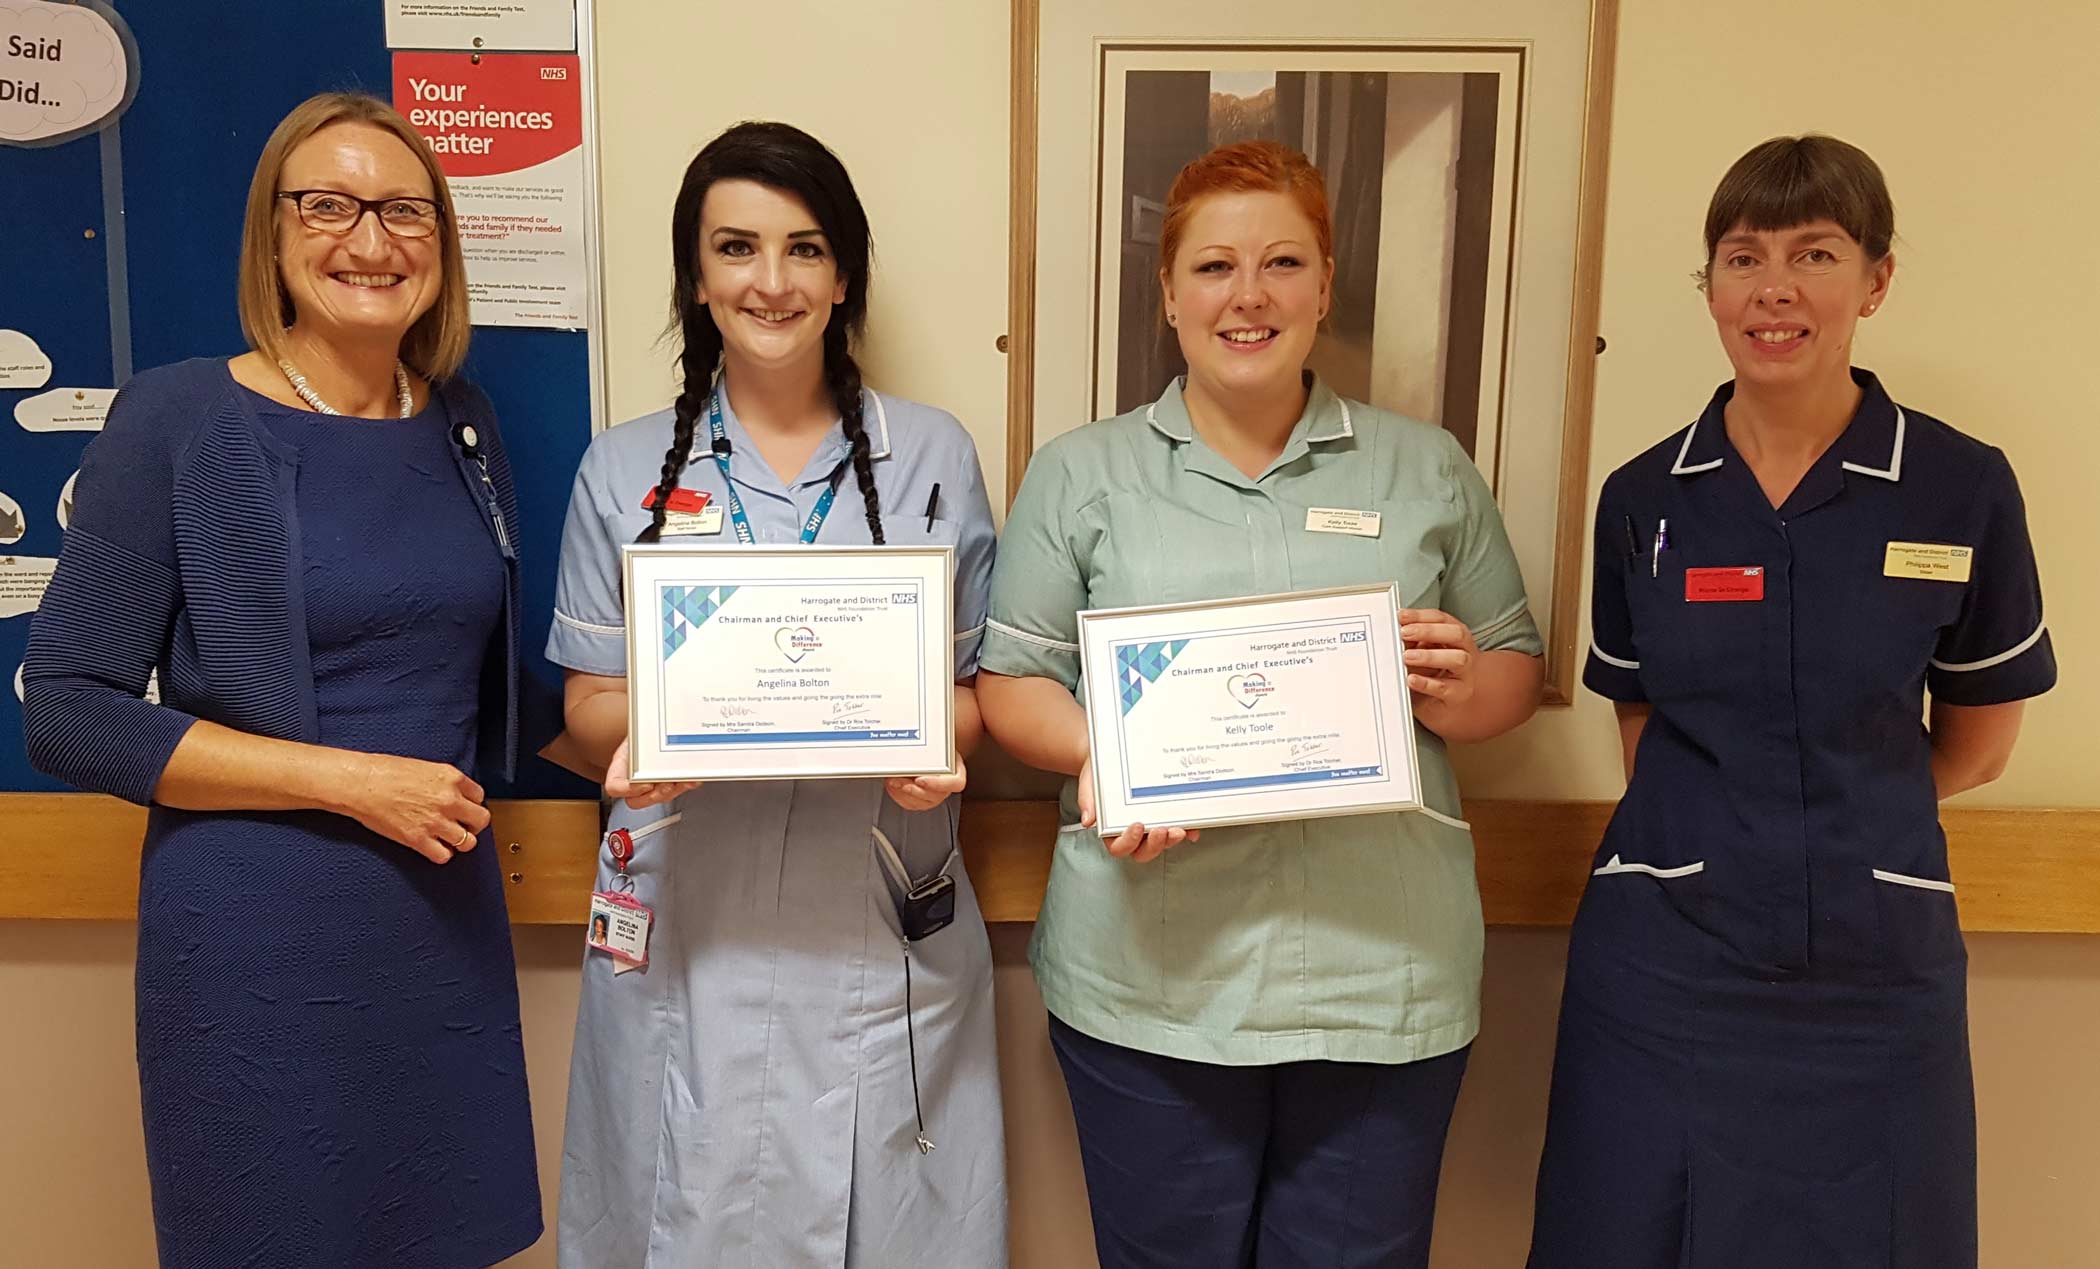 Ros Tolcher, Chief Executive; Angelina Bolton, Registered Nurse Worker; and Kelly Toole, Care Support Worker, with their Making a Difference Award certificate; and Phillippa West, Granby Ward Sister